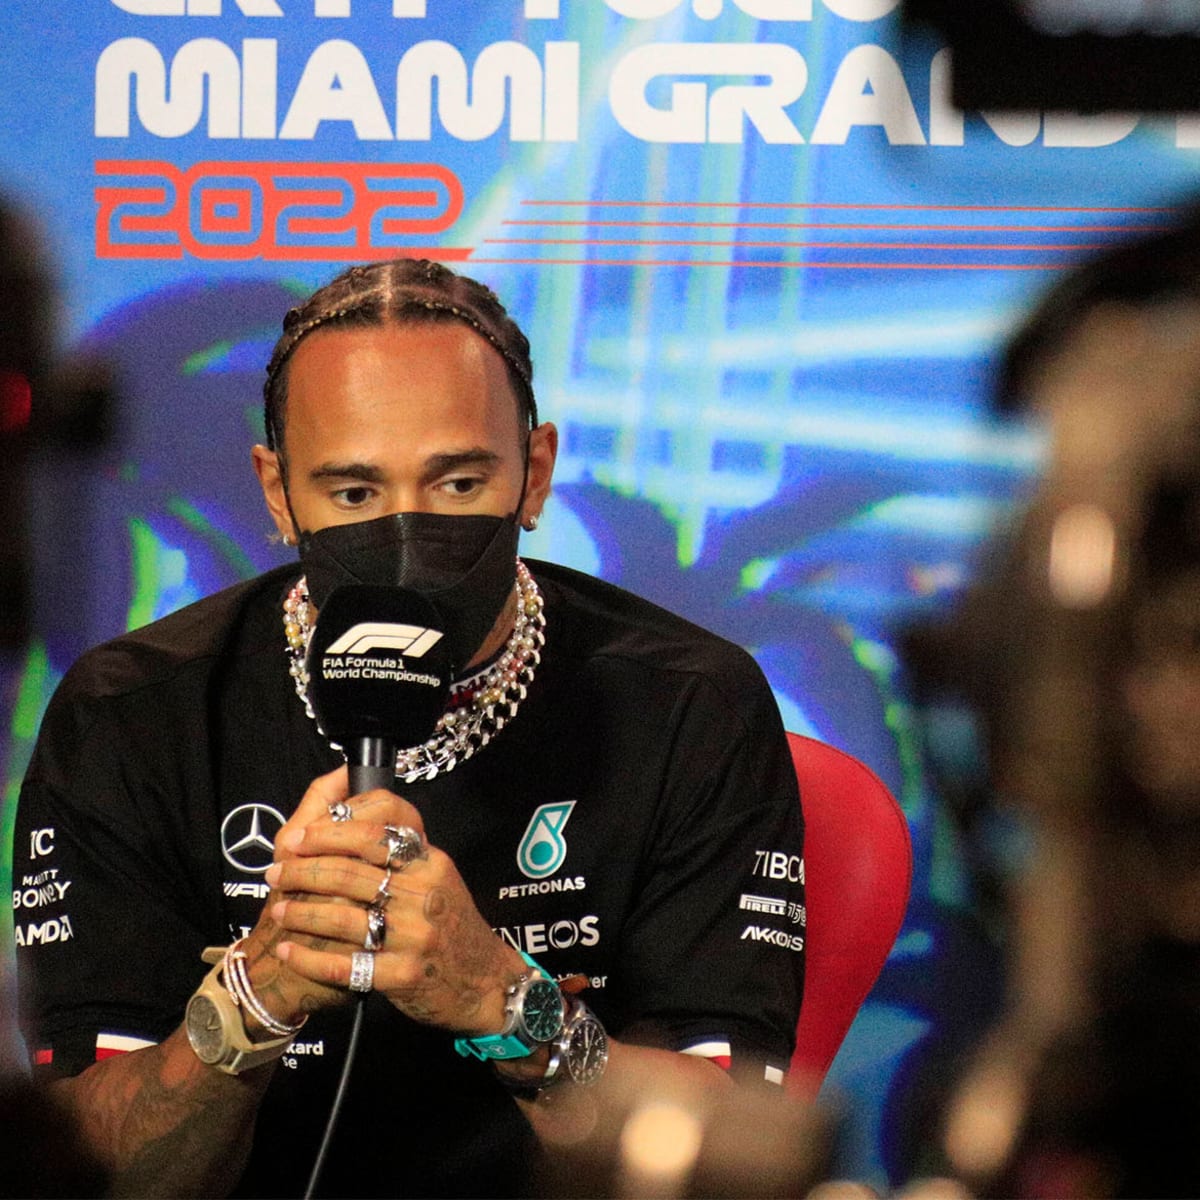 Lewis Hamilton Threatens to Not Race in F1 Miami GP if New Ban Enforced